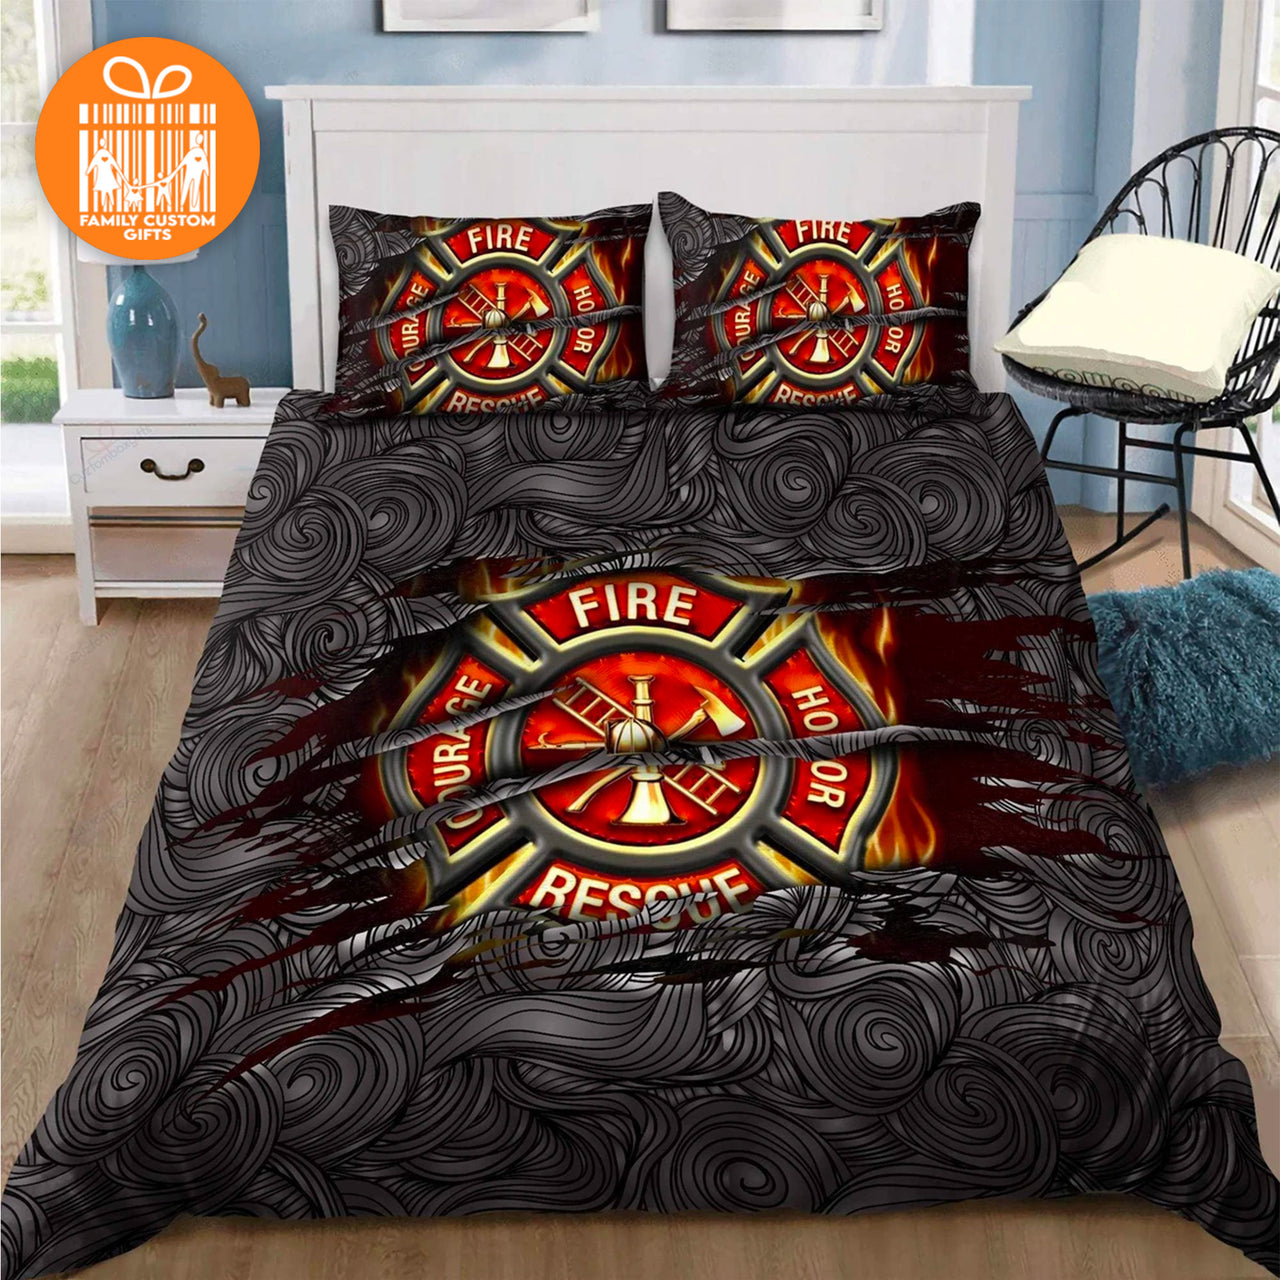 Comforter Fire Department Fire Fighters Custom Bedding Set for Kids Teens Adult Personalized Premium Bed Set